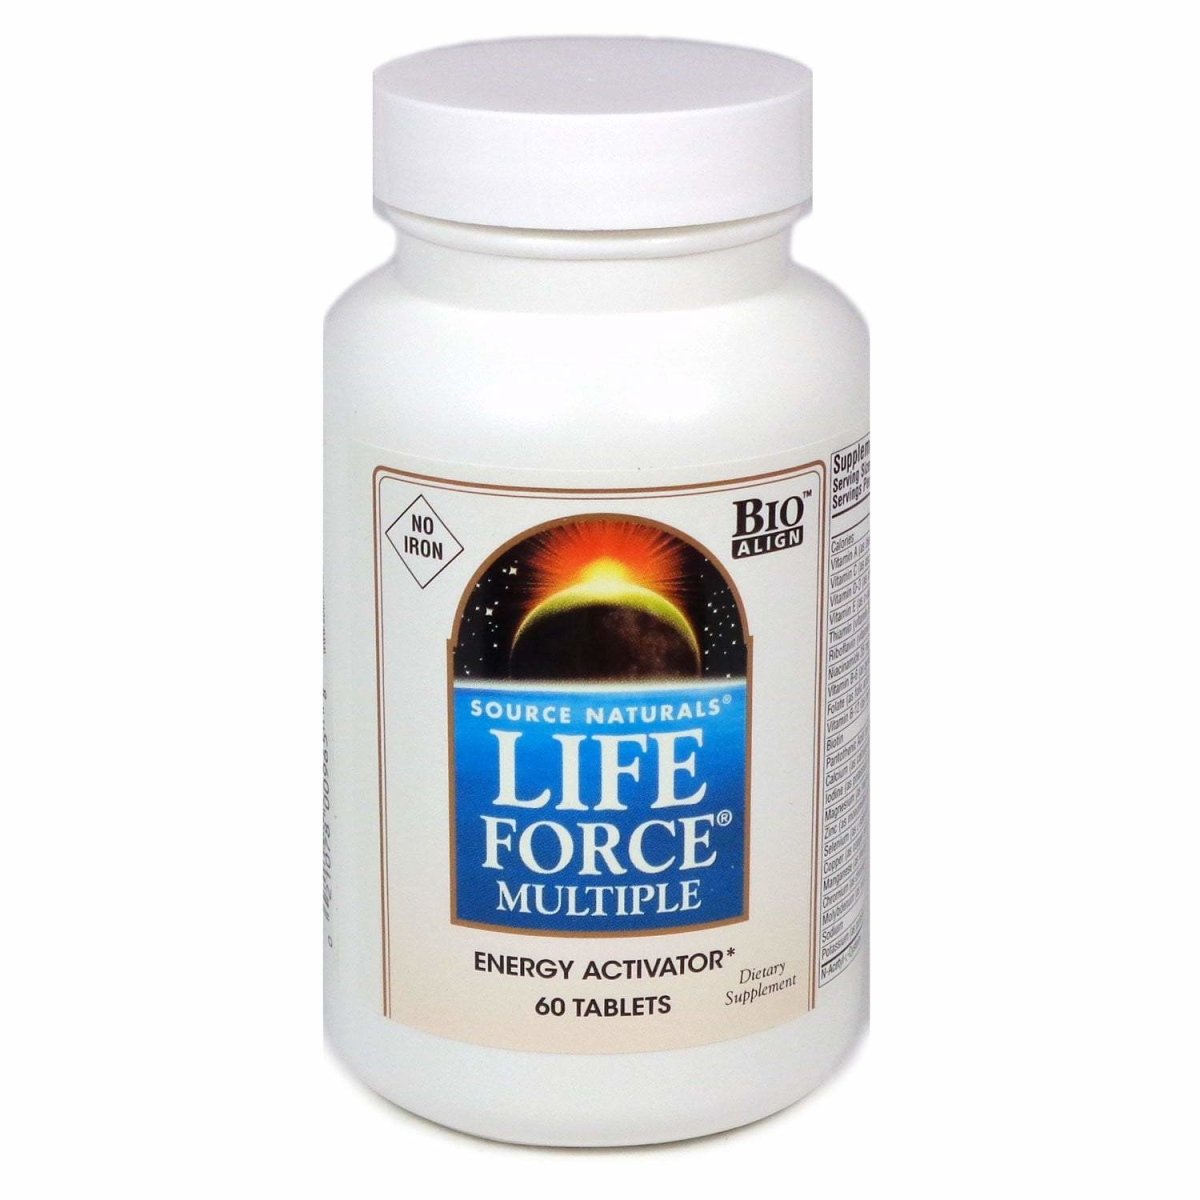 Source Naturals Life Force™ Multiple No Iron -- 60 Tablets